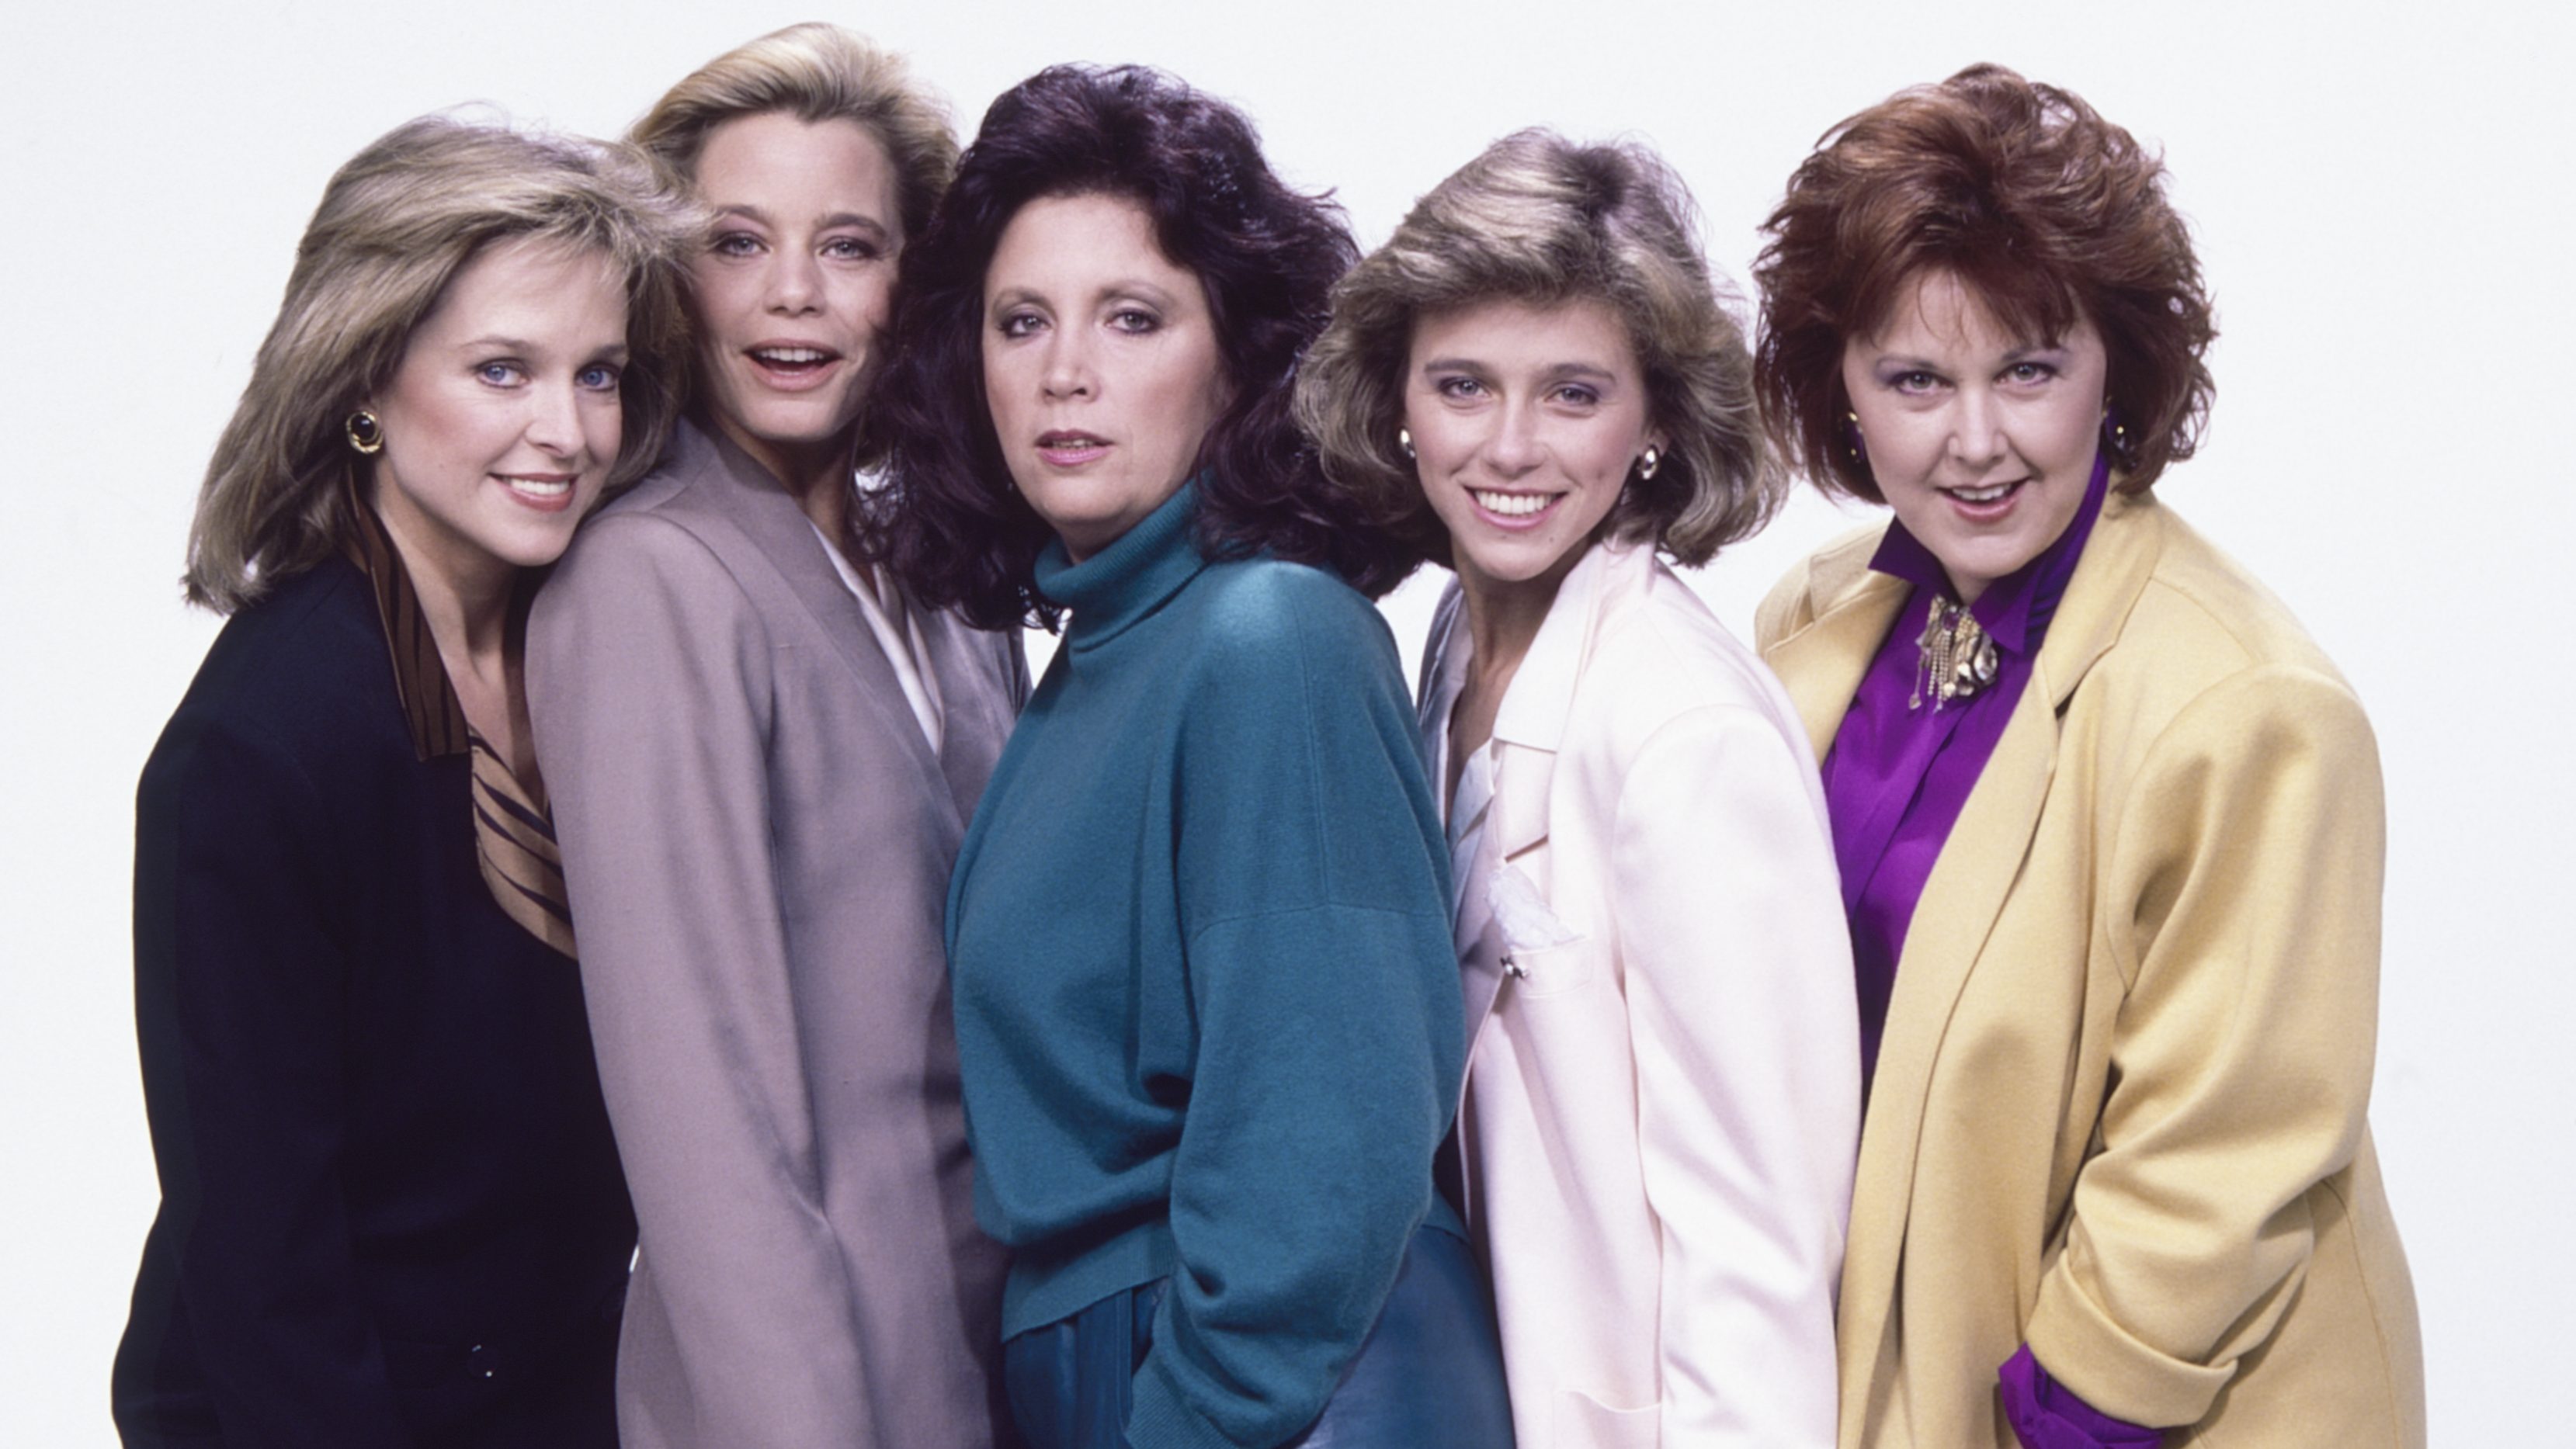 The women of 'L.A. Law', 1986